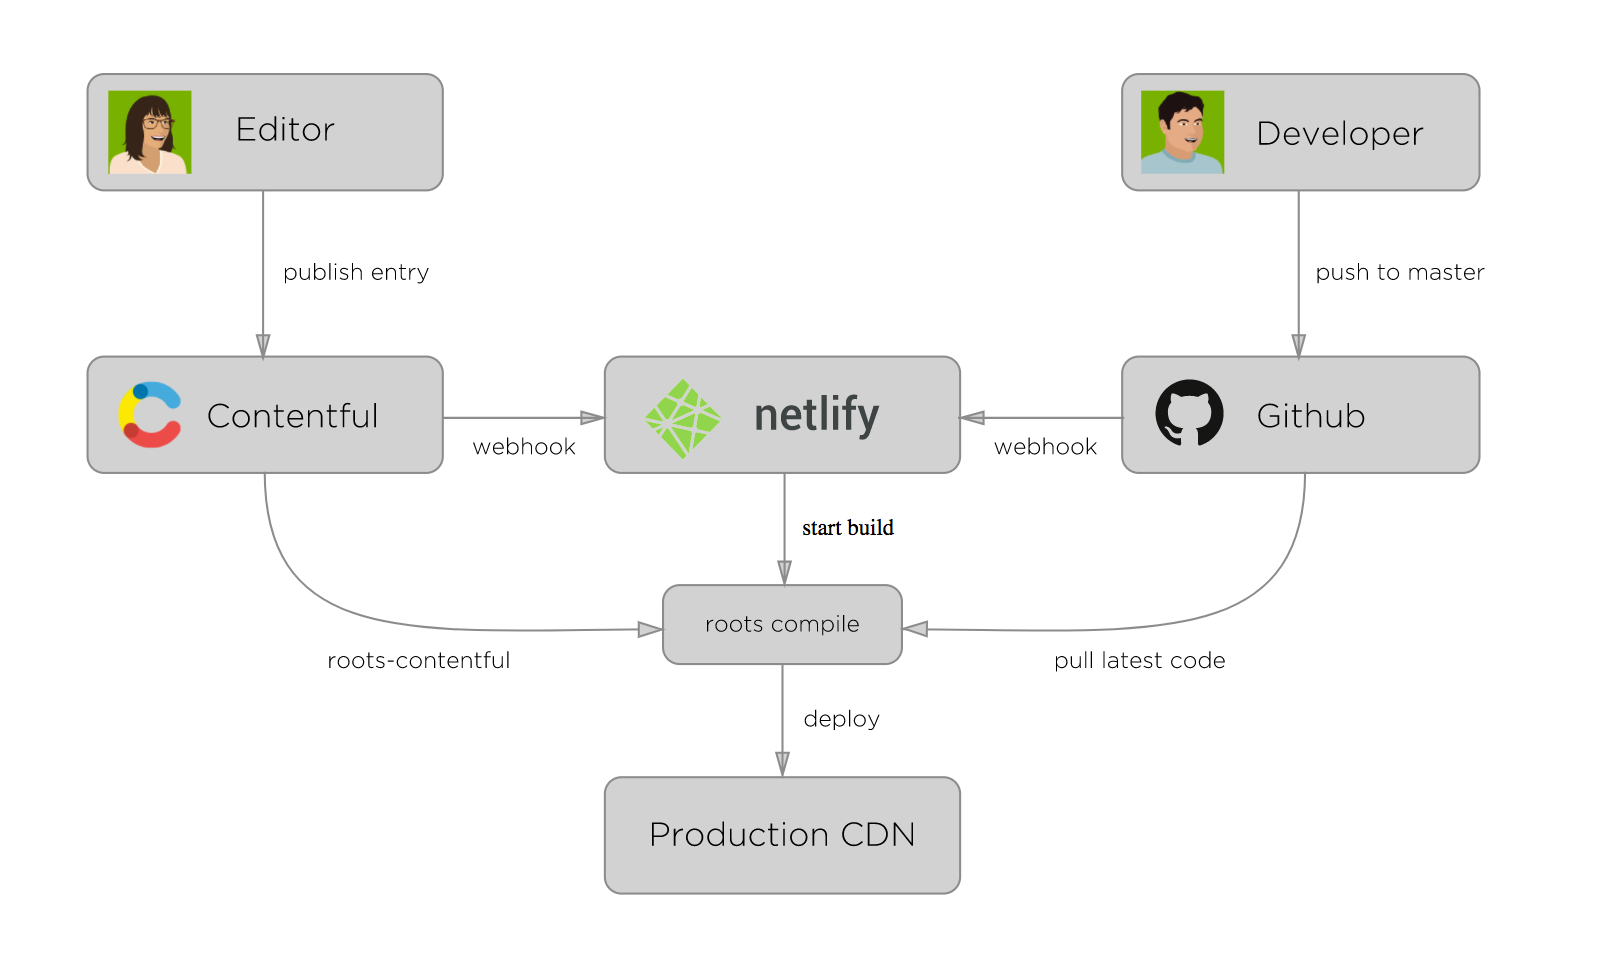 A diagram of the contribution and development flow of a site that clearly shows the separation of concerns between developers and contributors.